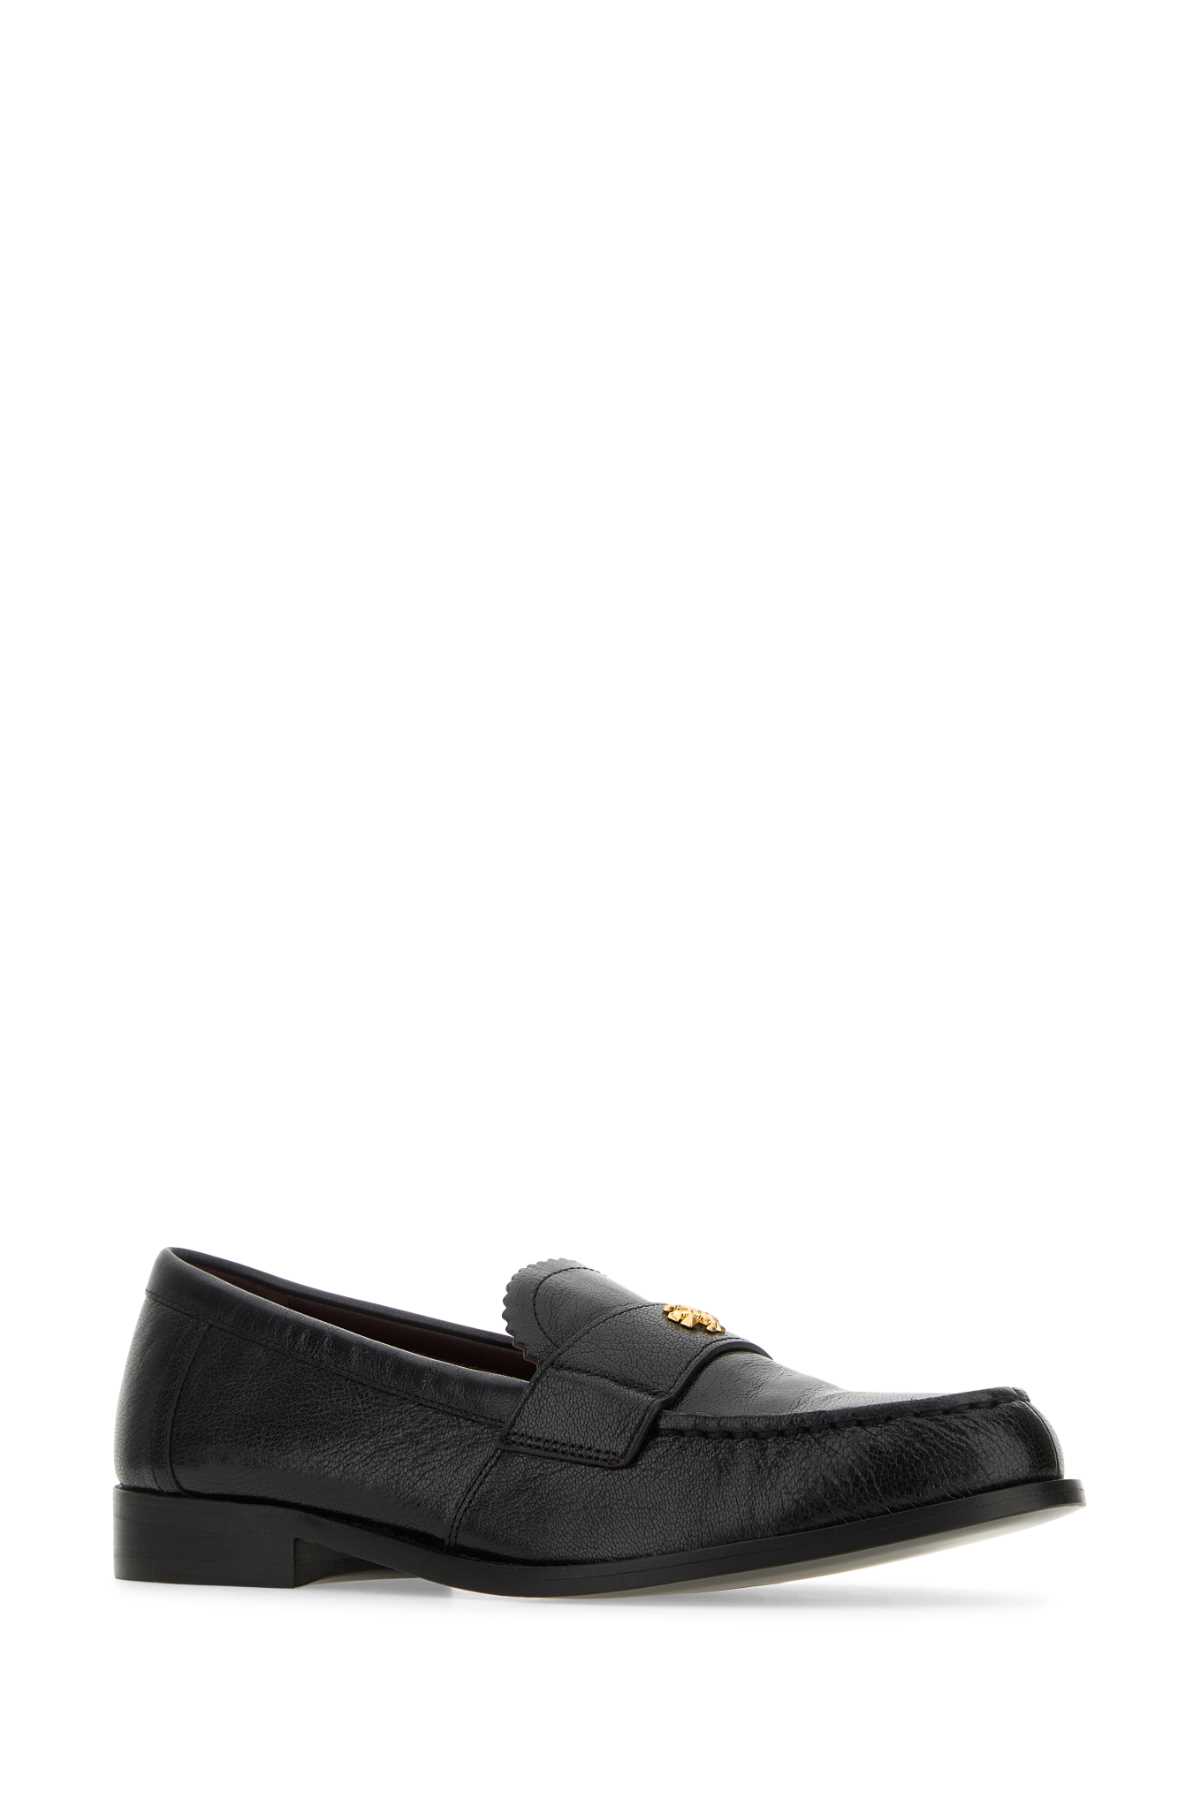 Shop Tory Burch Black Leather Classic Loafers In Perfectblack